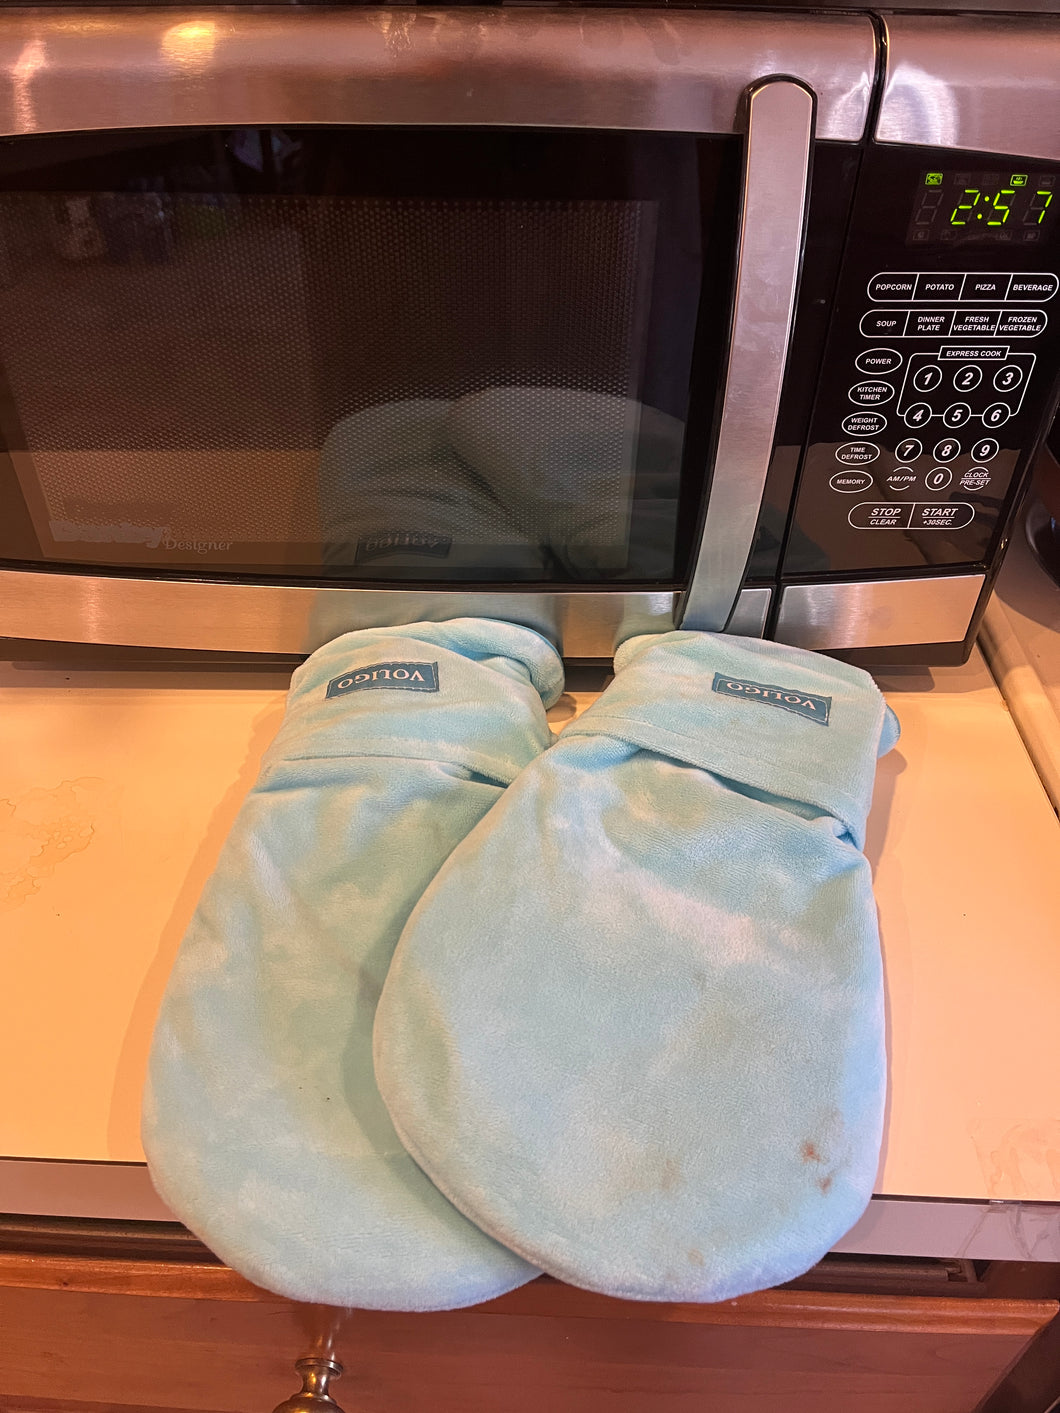 Light blue voligo mitts sitting on a counter in front of a microwave.